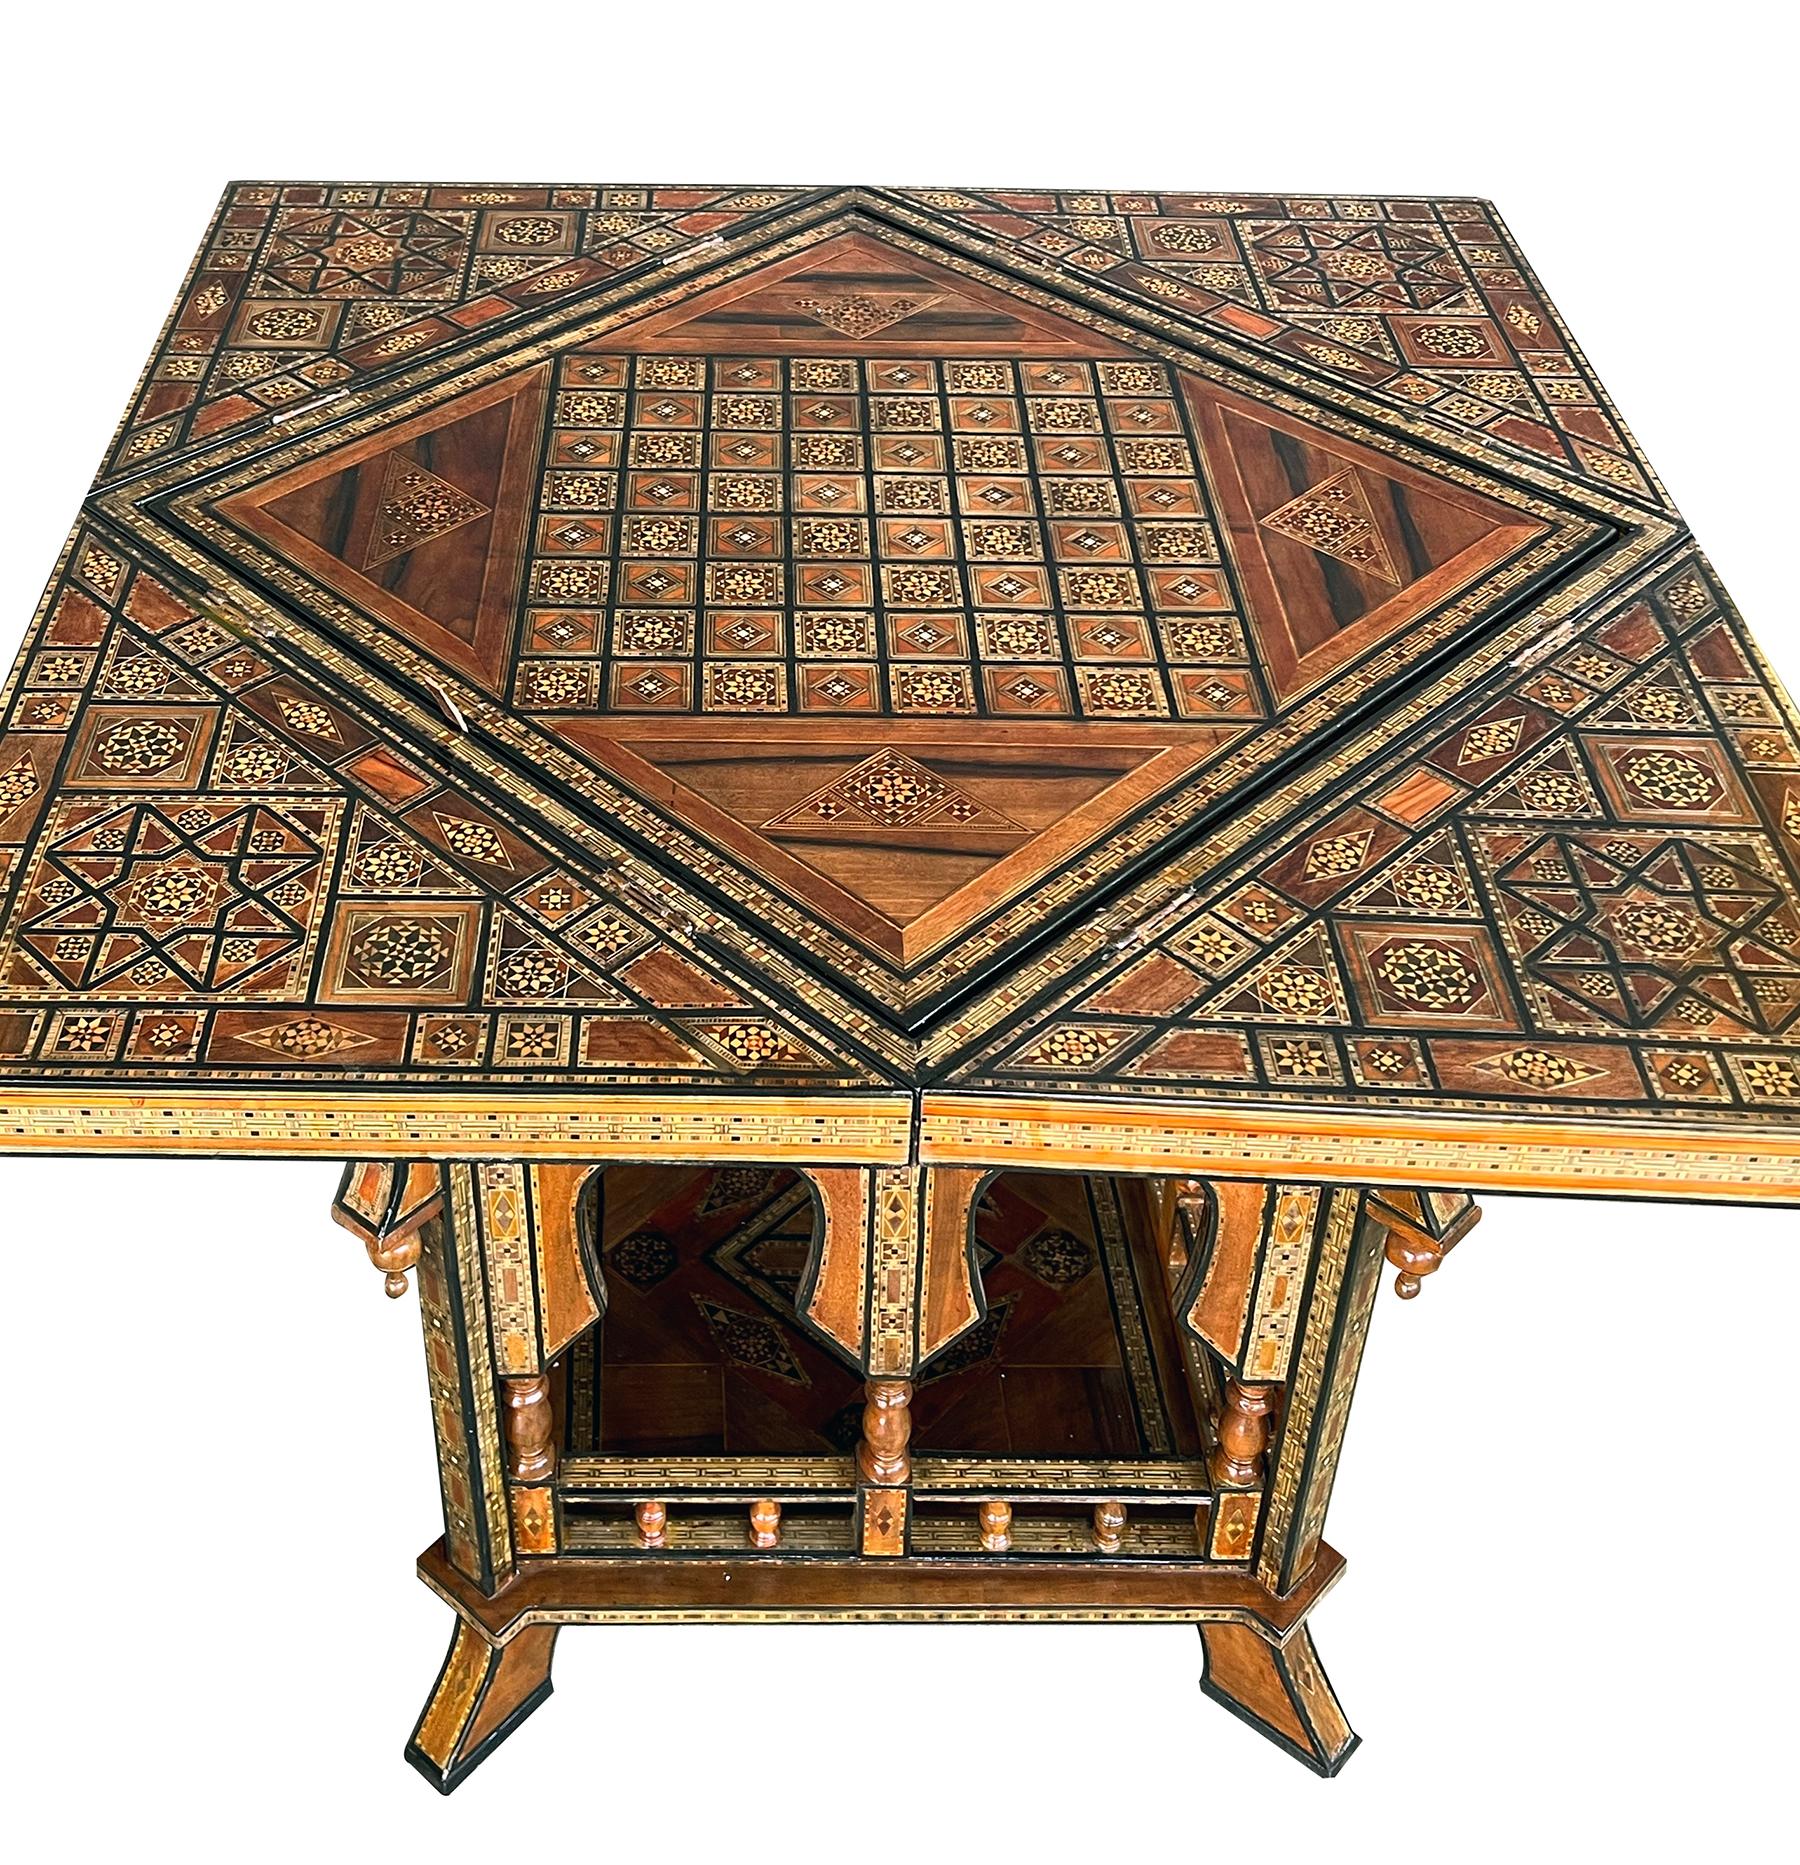 An impressively designed game table featuring a pivoting handkerchief top opening to reveal an intricately inlaid surface centering a removable center panel with game board and hand-tooled green leather surface on the flip side; resting on a body